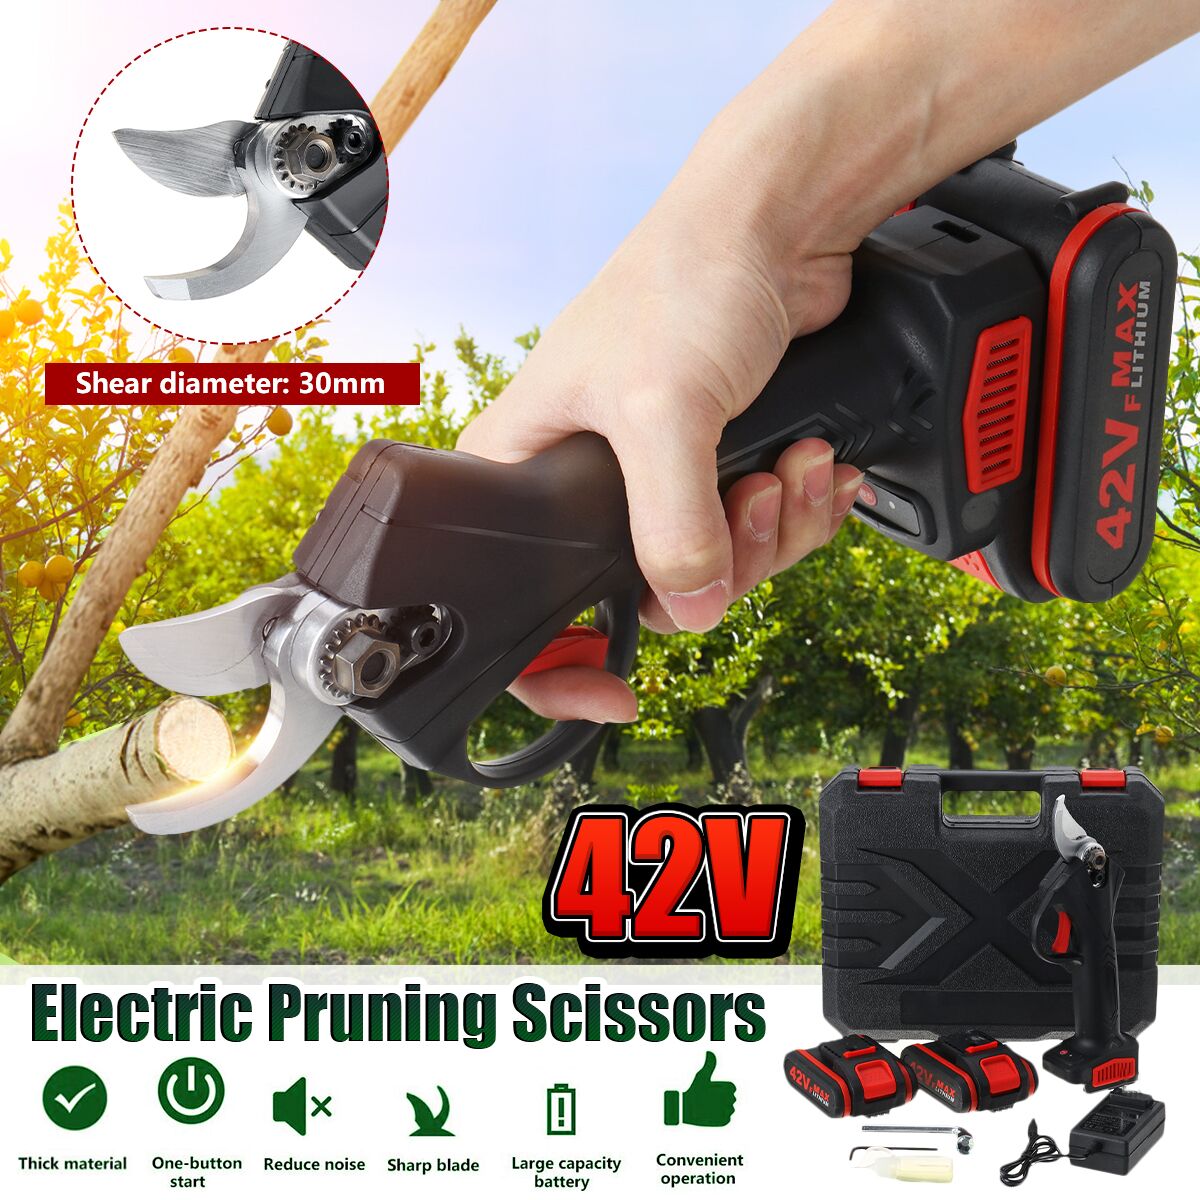 42VF-Rechargeable-Electric-Pruning-Shears-Scissors-Branch-Cutter-Garden-Tool-W-1-or-2-Li-ion-Battery-1709169-1